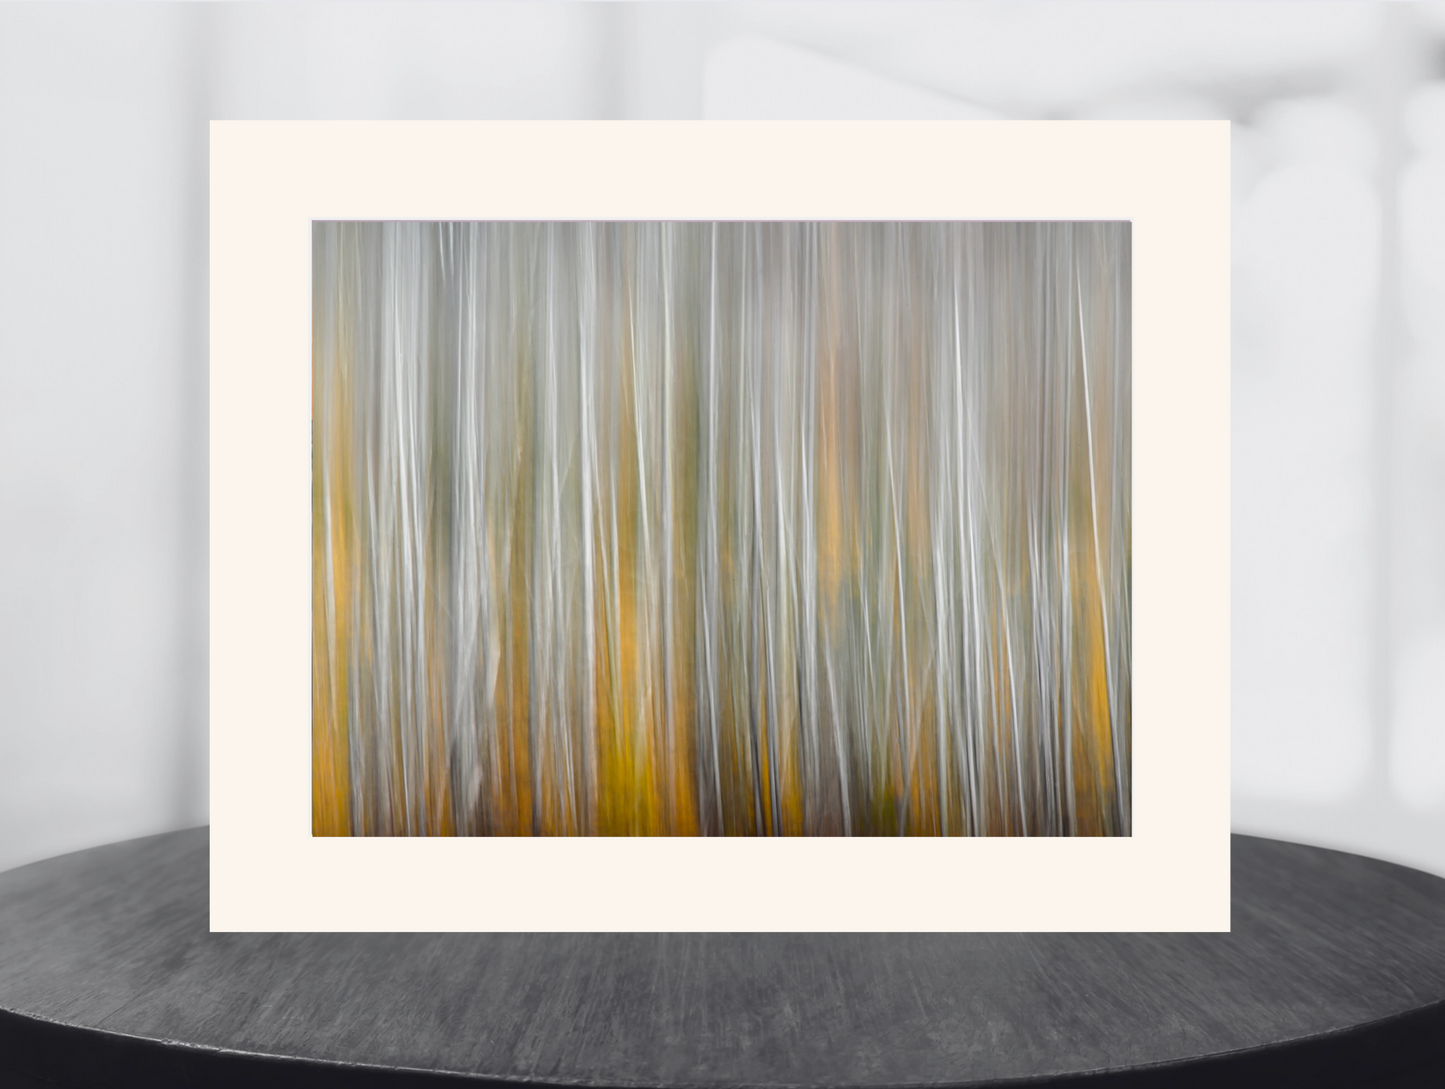 Abstract Autumn image of birch and tamarack trees in an adirondack forest